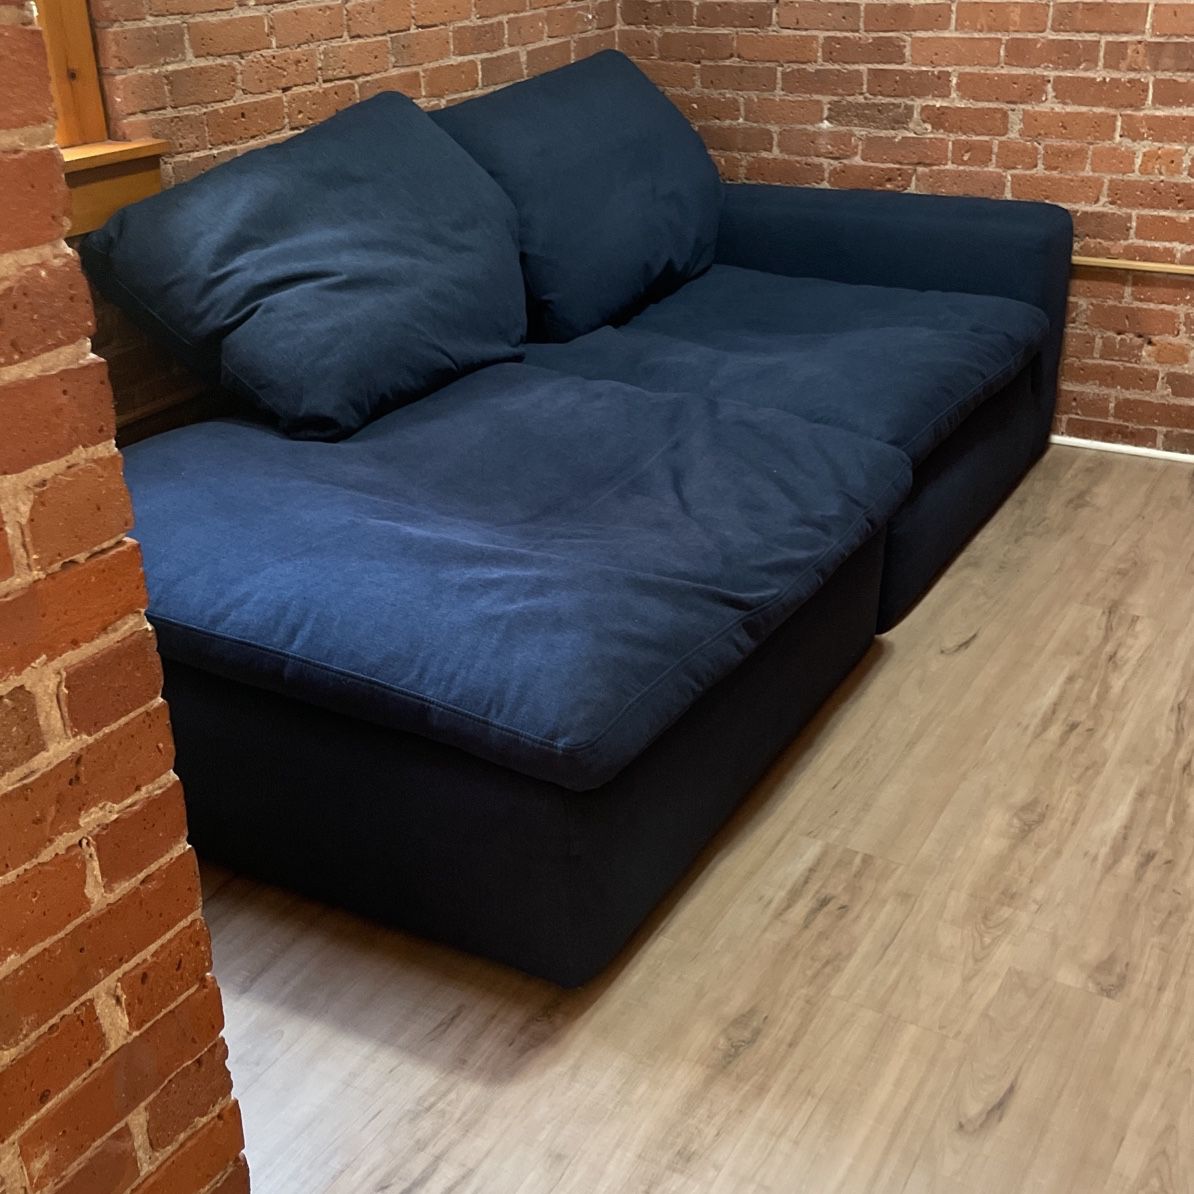 FREE Couch- Blue 